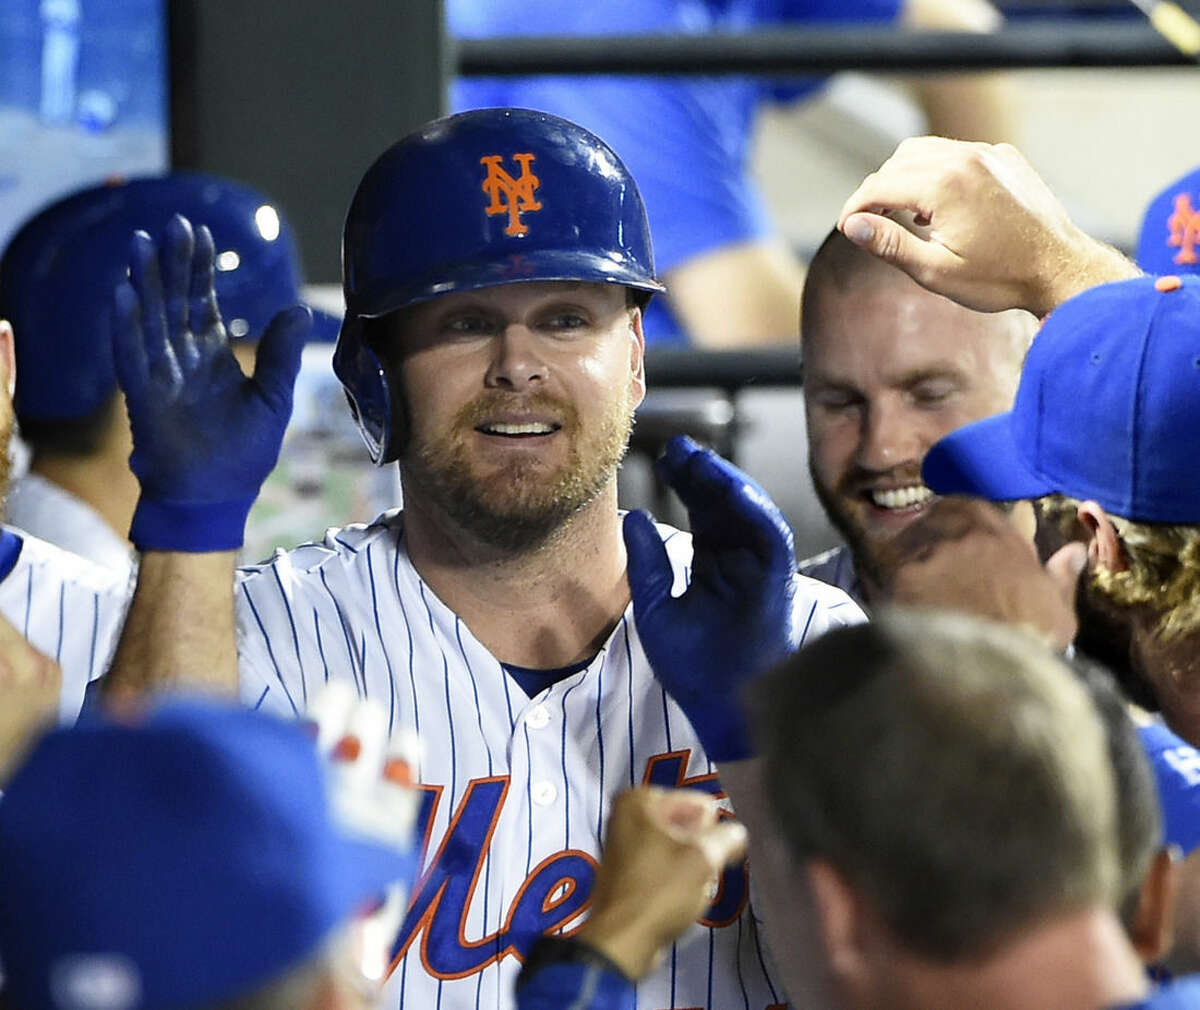 New York Mets' Lucas Duda is congratulated by teammates in the dugout after hitting his second home run of a baseball game against the Washington Nationals in the seventh inning at Citi Field on Saturday, Aug. 1, 2015, in New York. (AP Photo/Kathy Kmonicek)